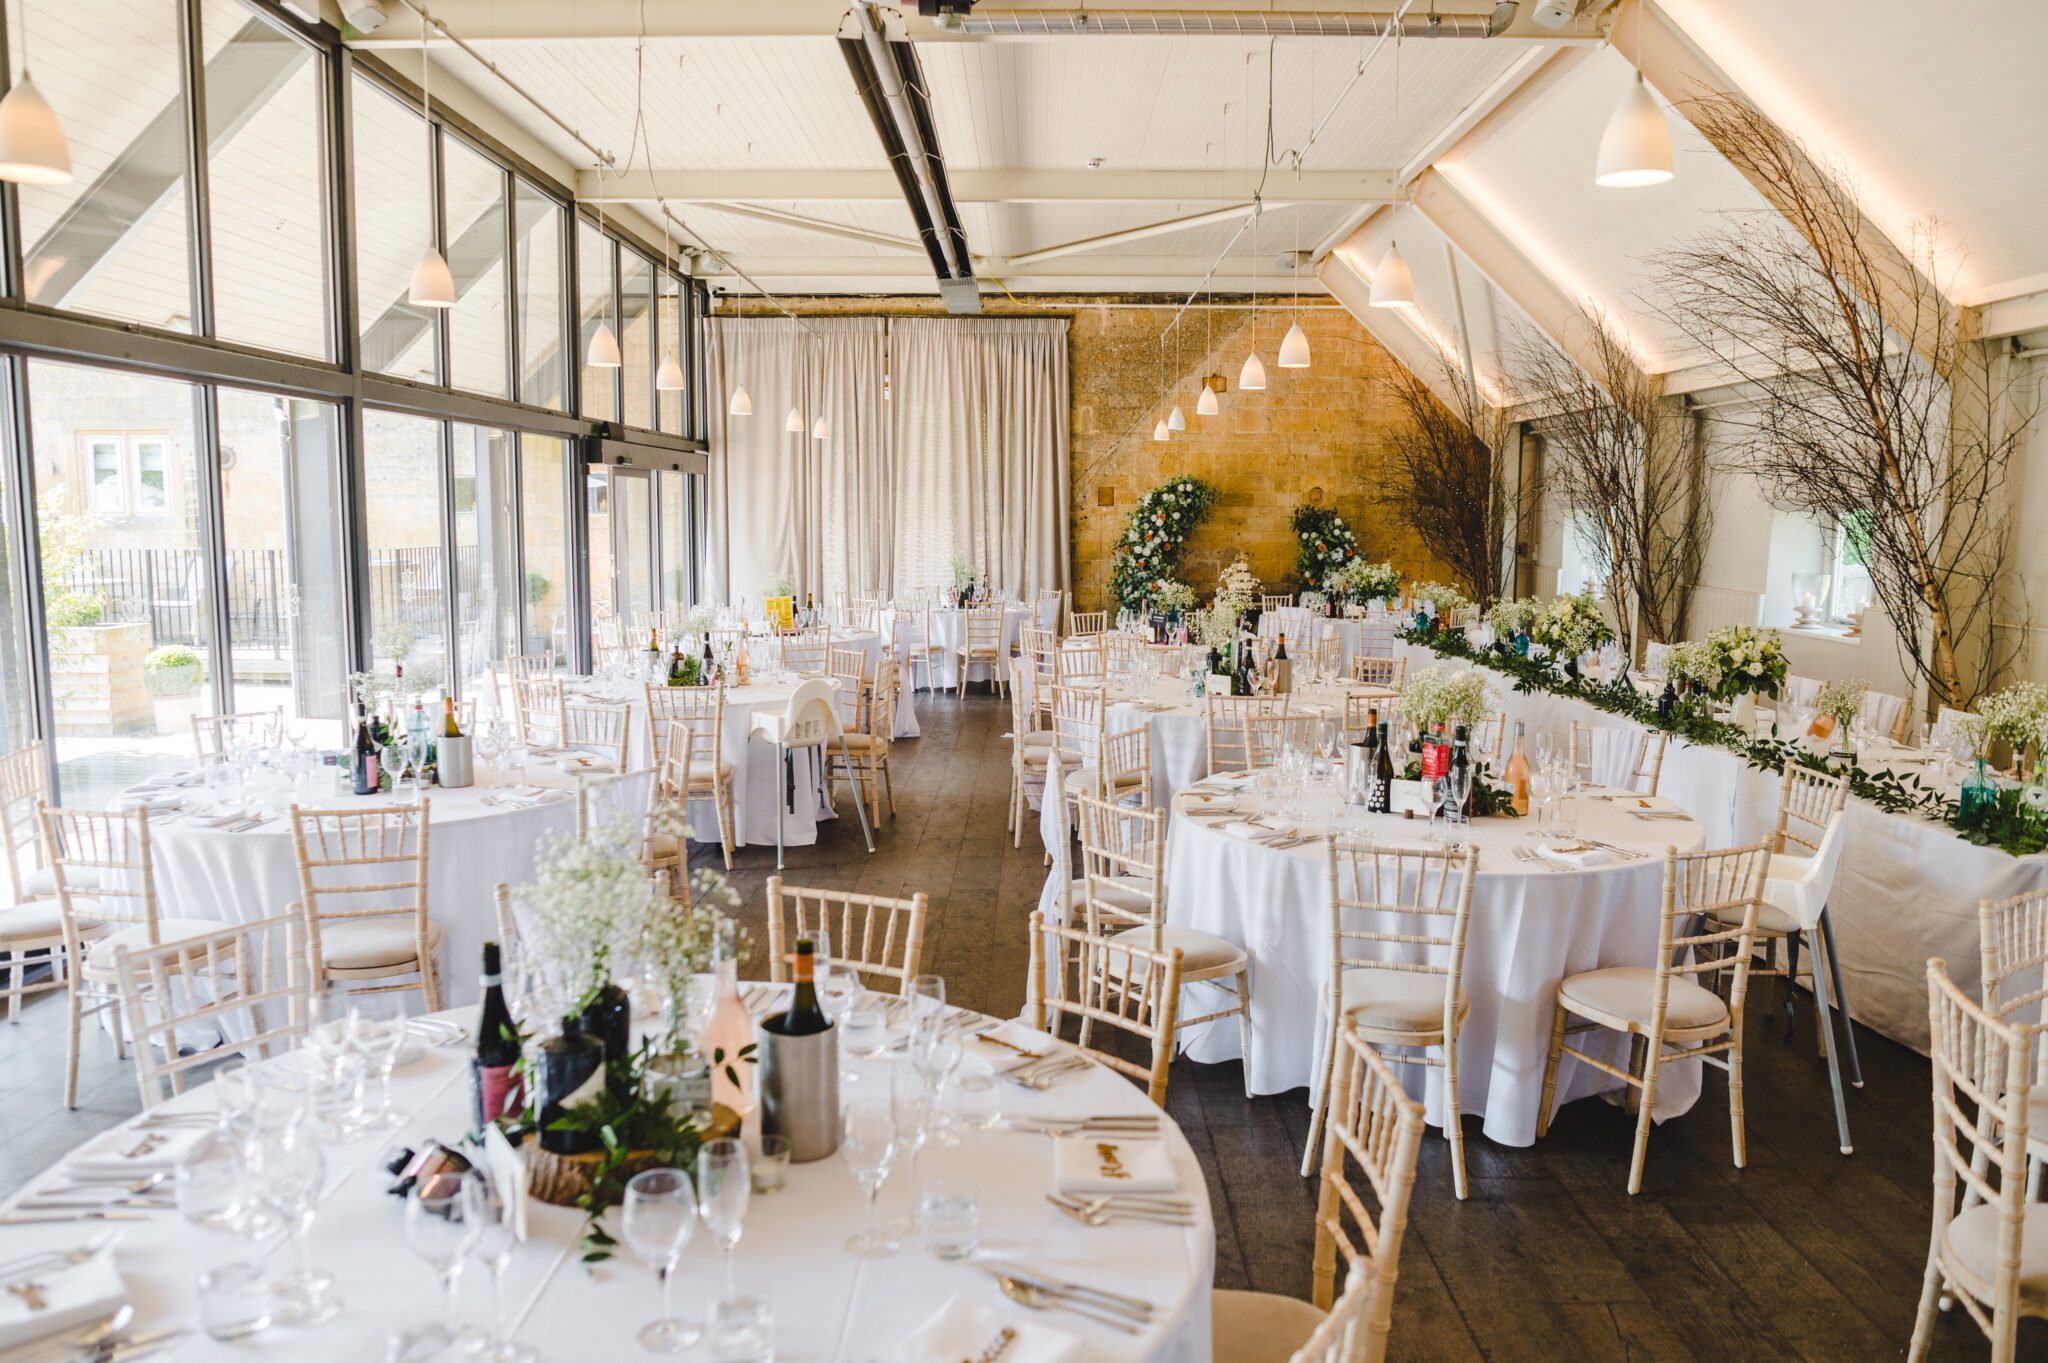 Wedding breakfast set up at Lapstone Barn in the Cotswolds